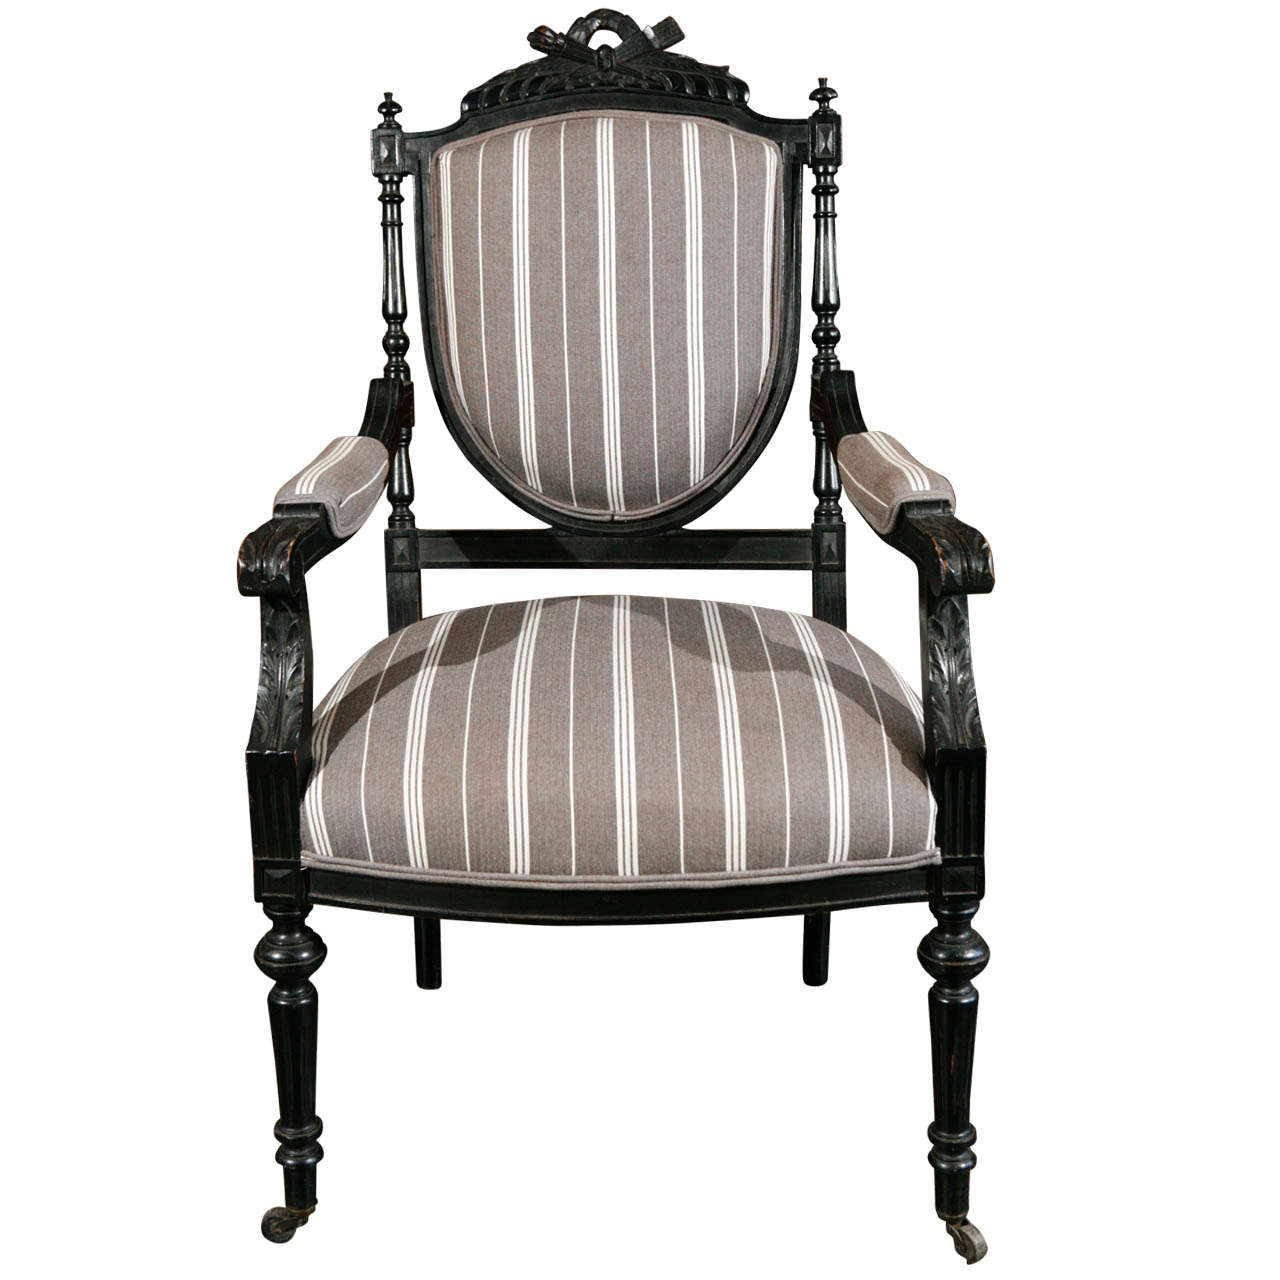 1870s Louis XVI Style Ebonized Fauteuil in Upholstered Linen For Sale 1